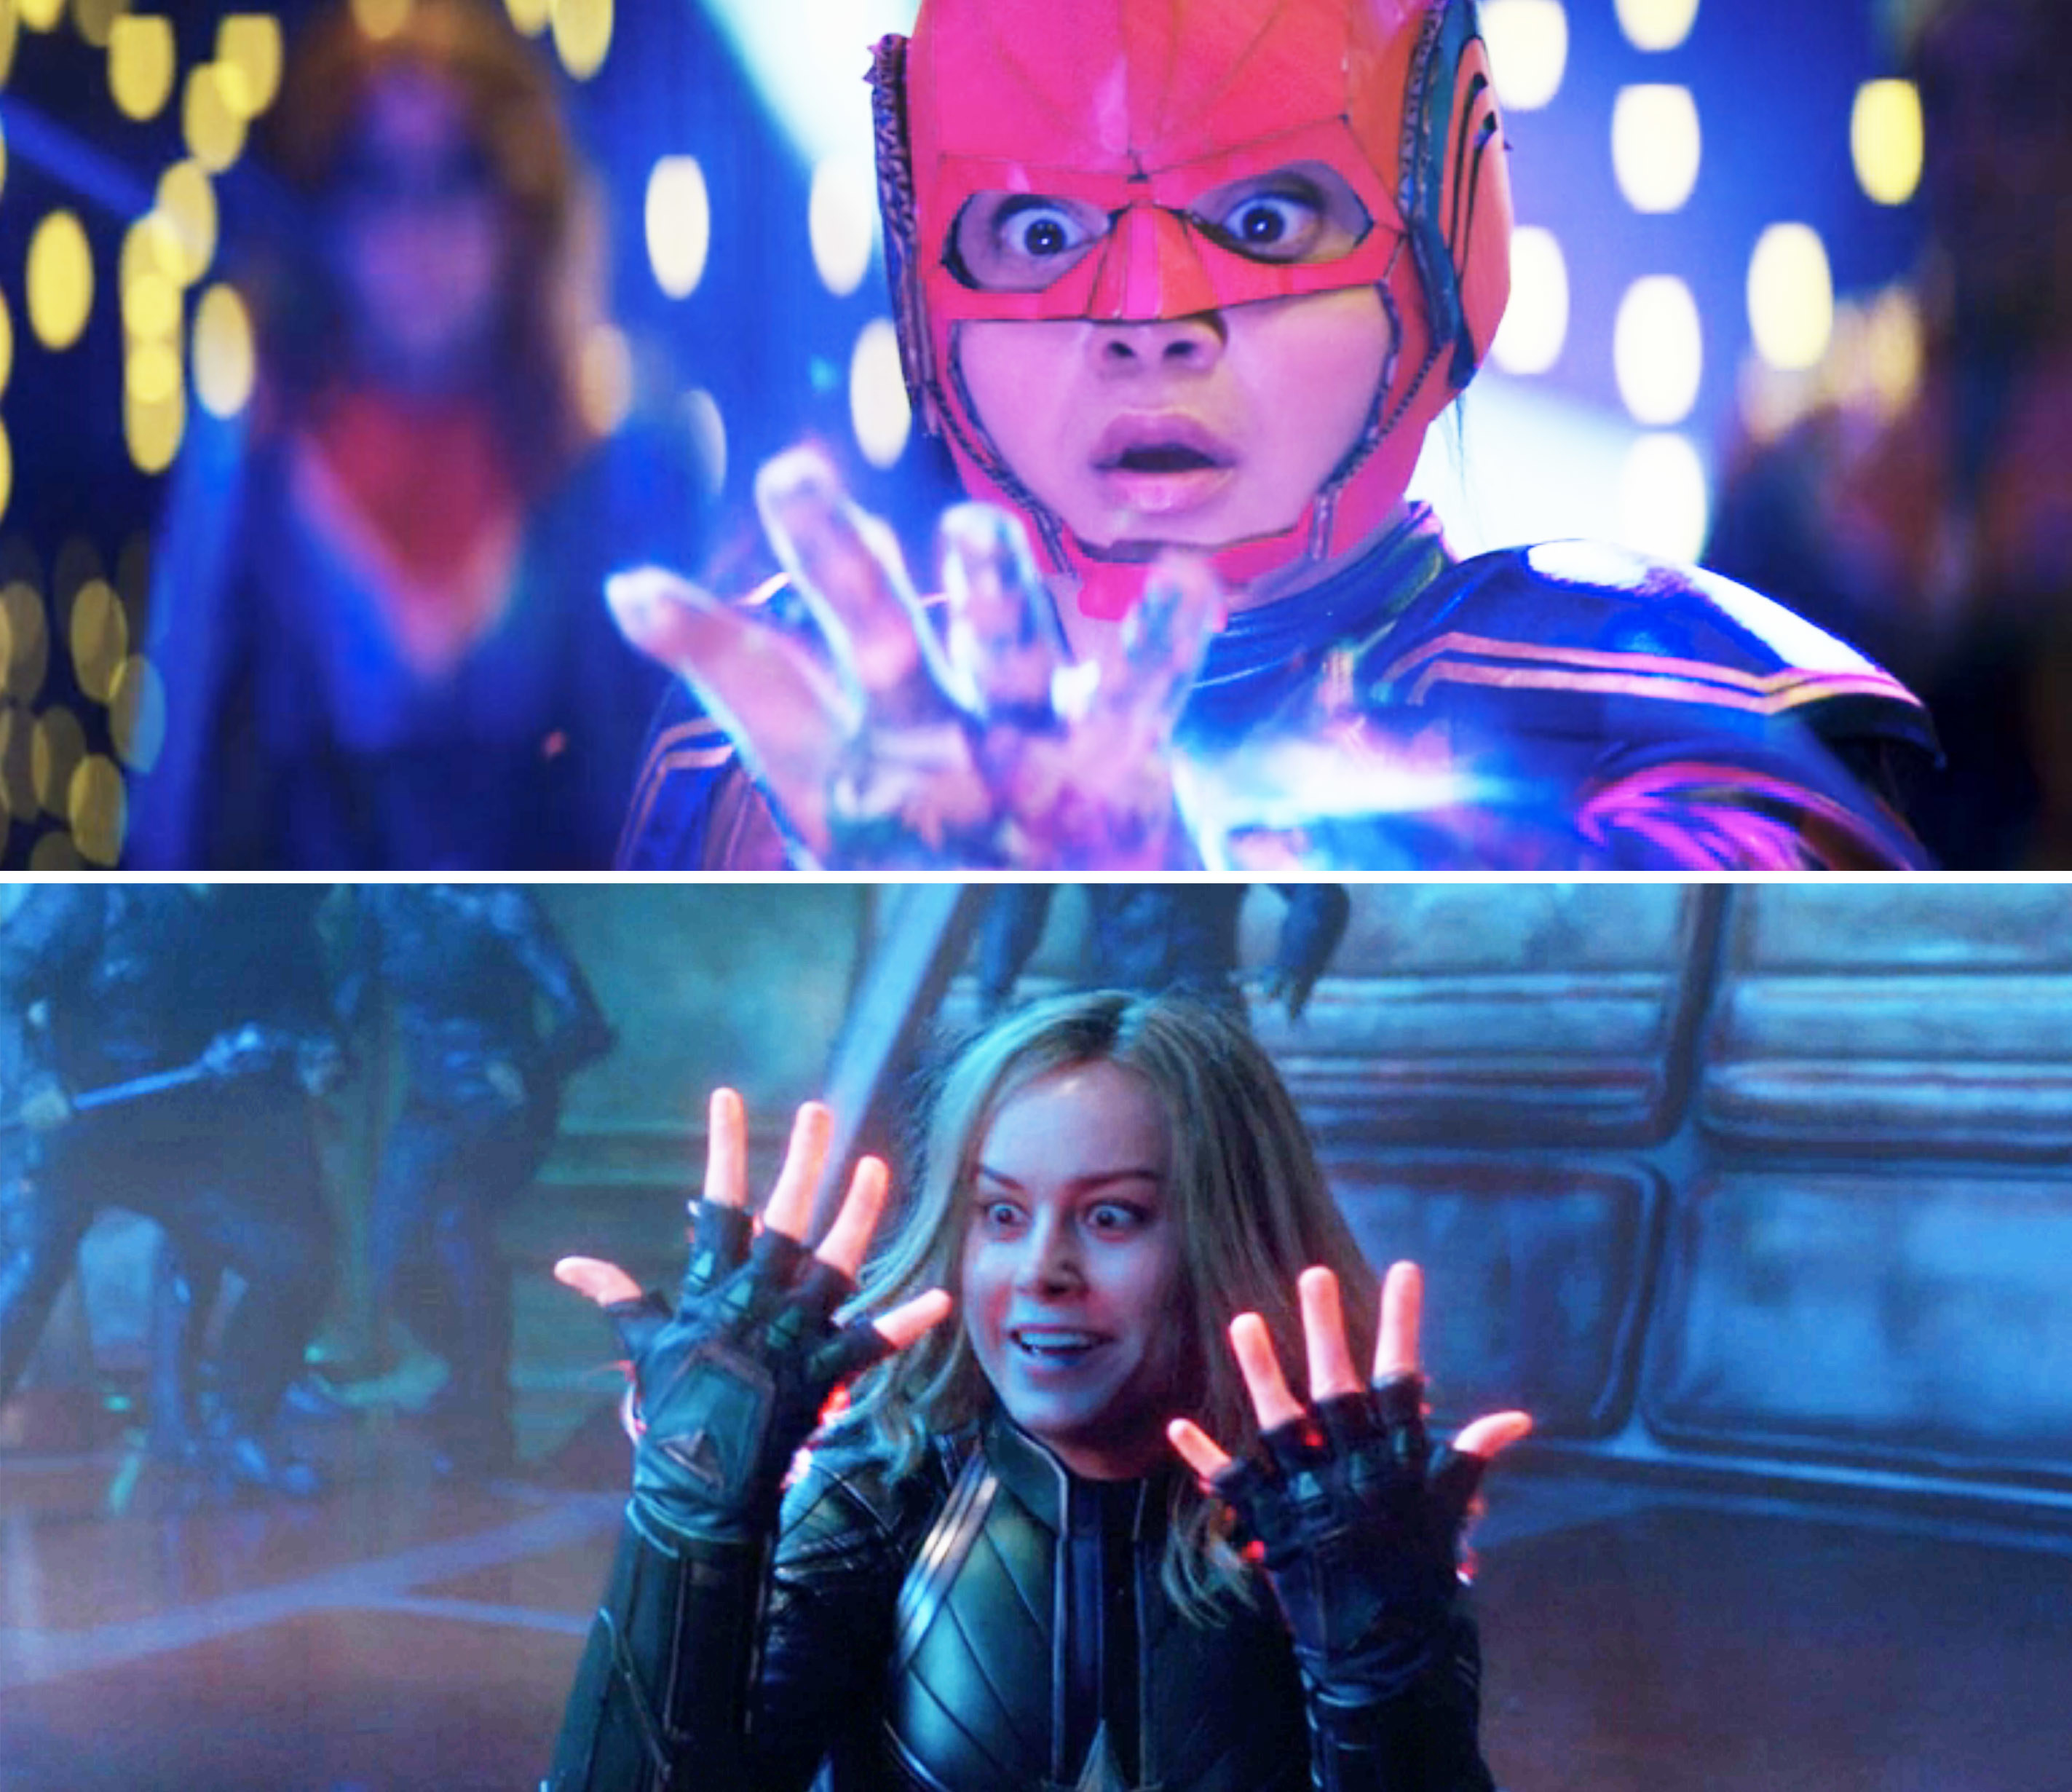 Kamala staring at her glowing hand juxtaposed with Carol also staring at her hands